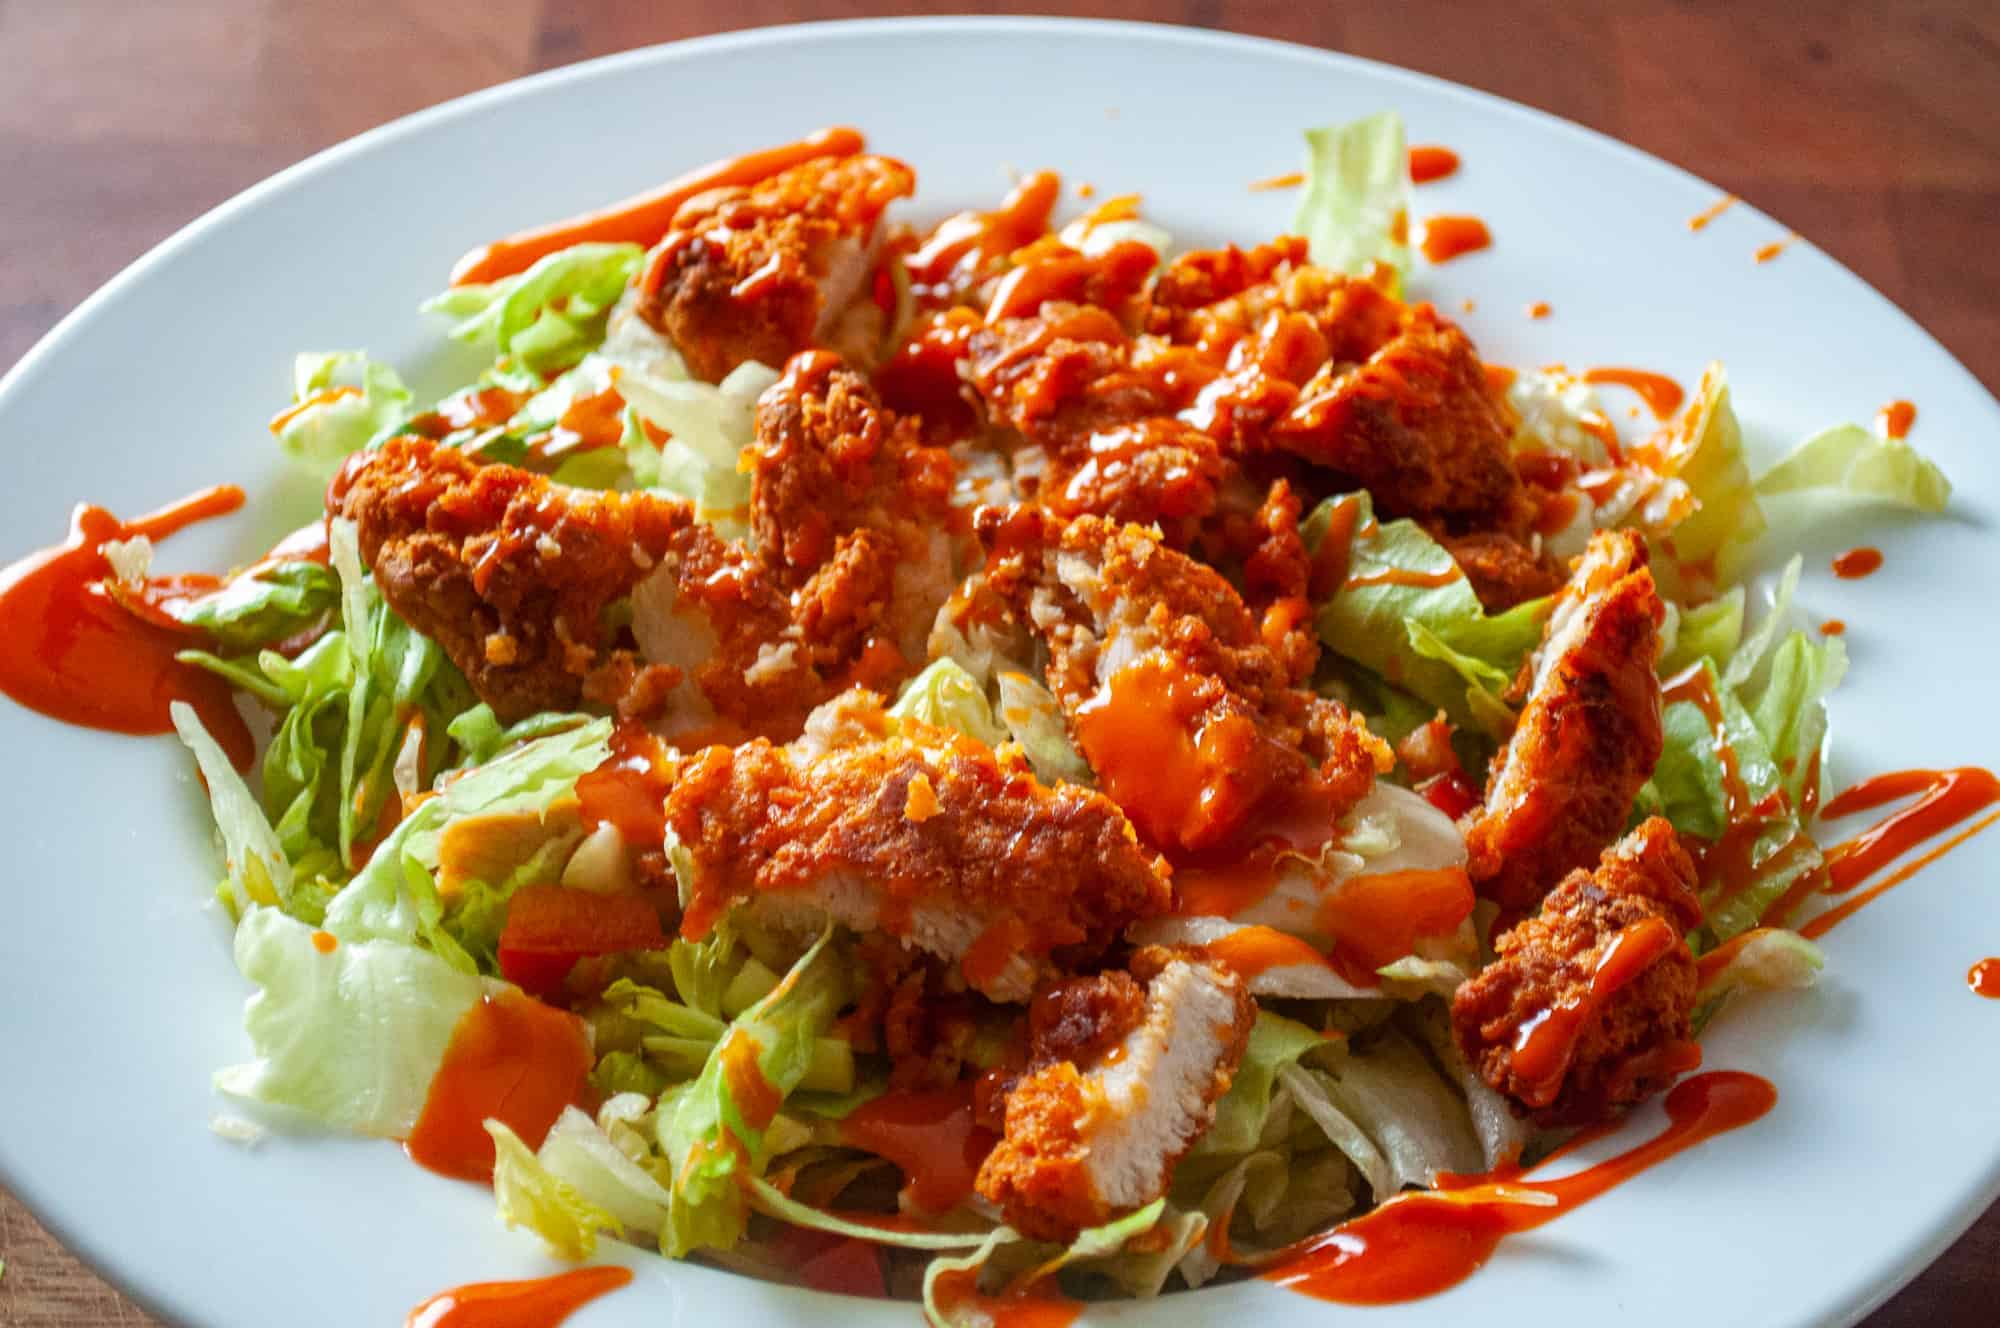 Crispy buffalo chicken salad drizzled with salad dressing.